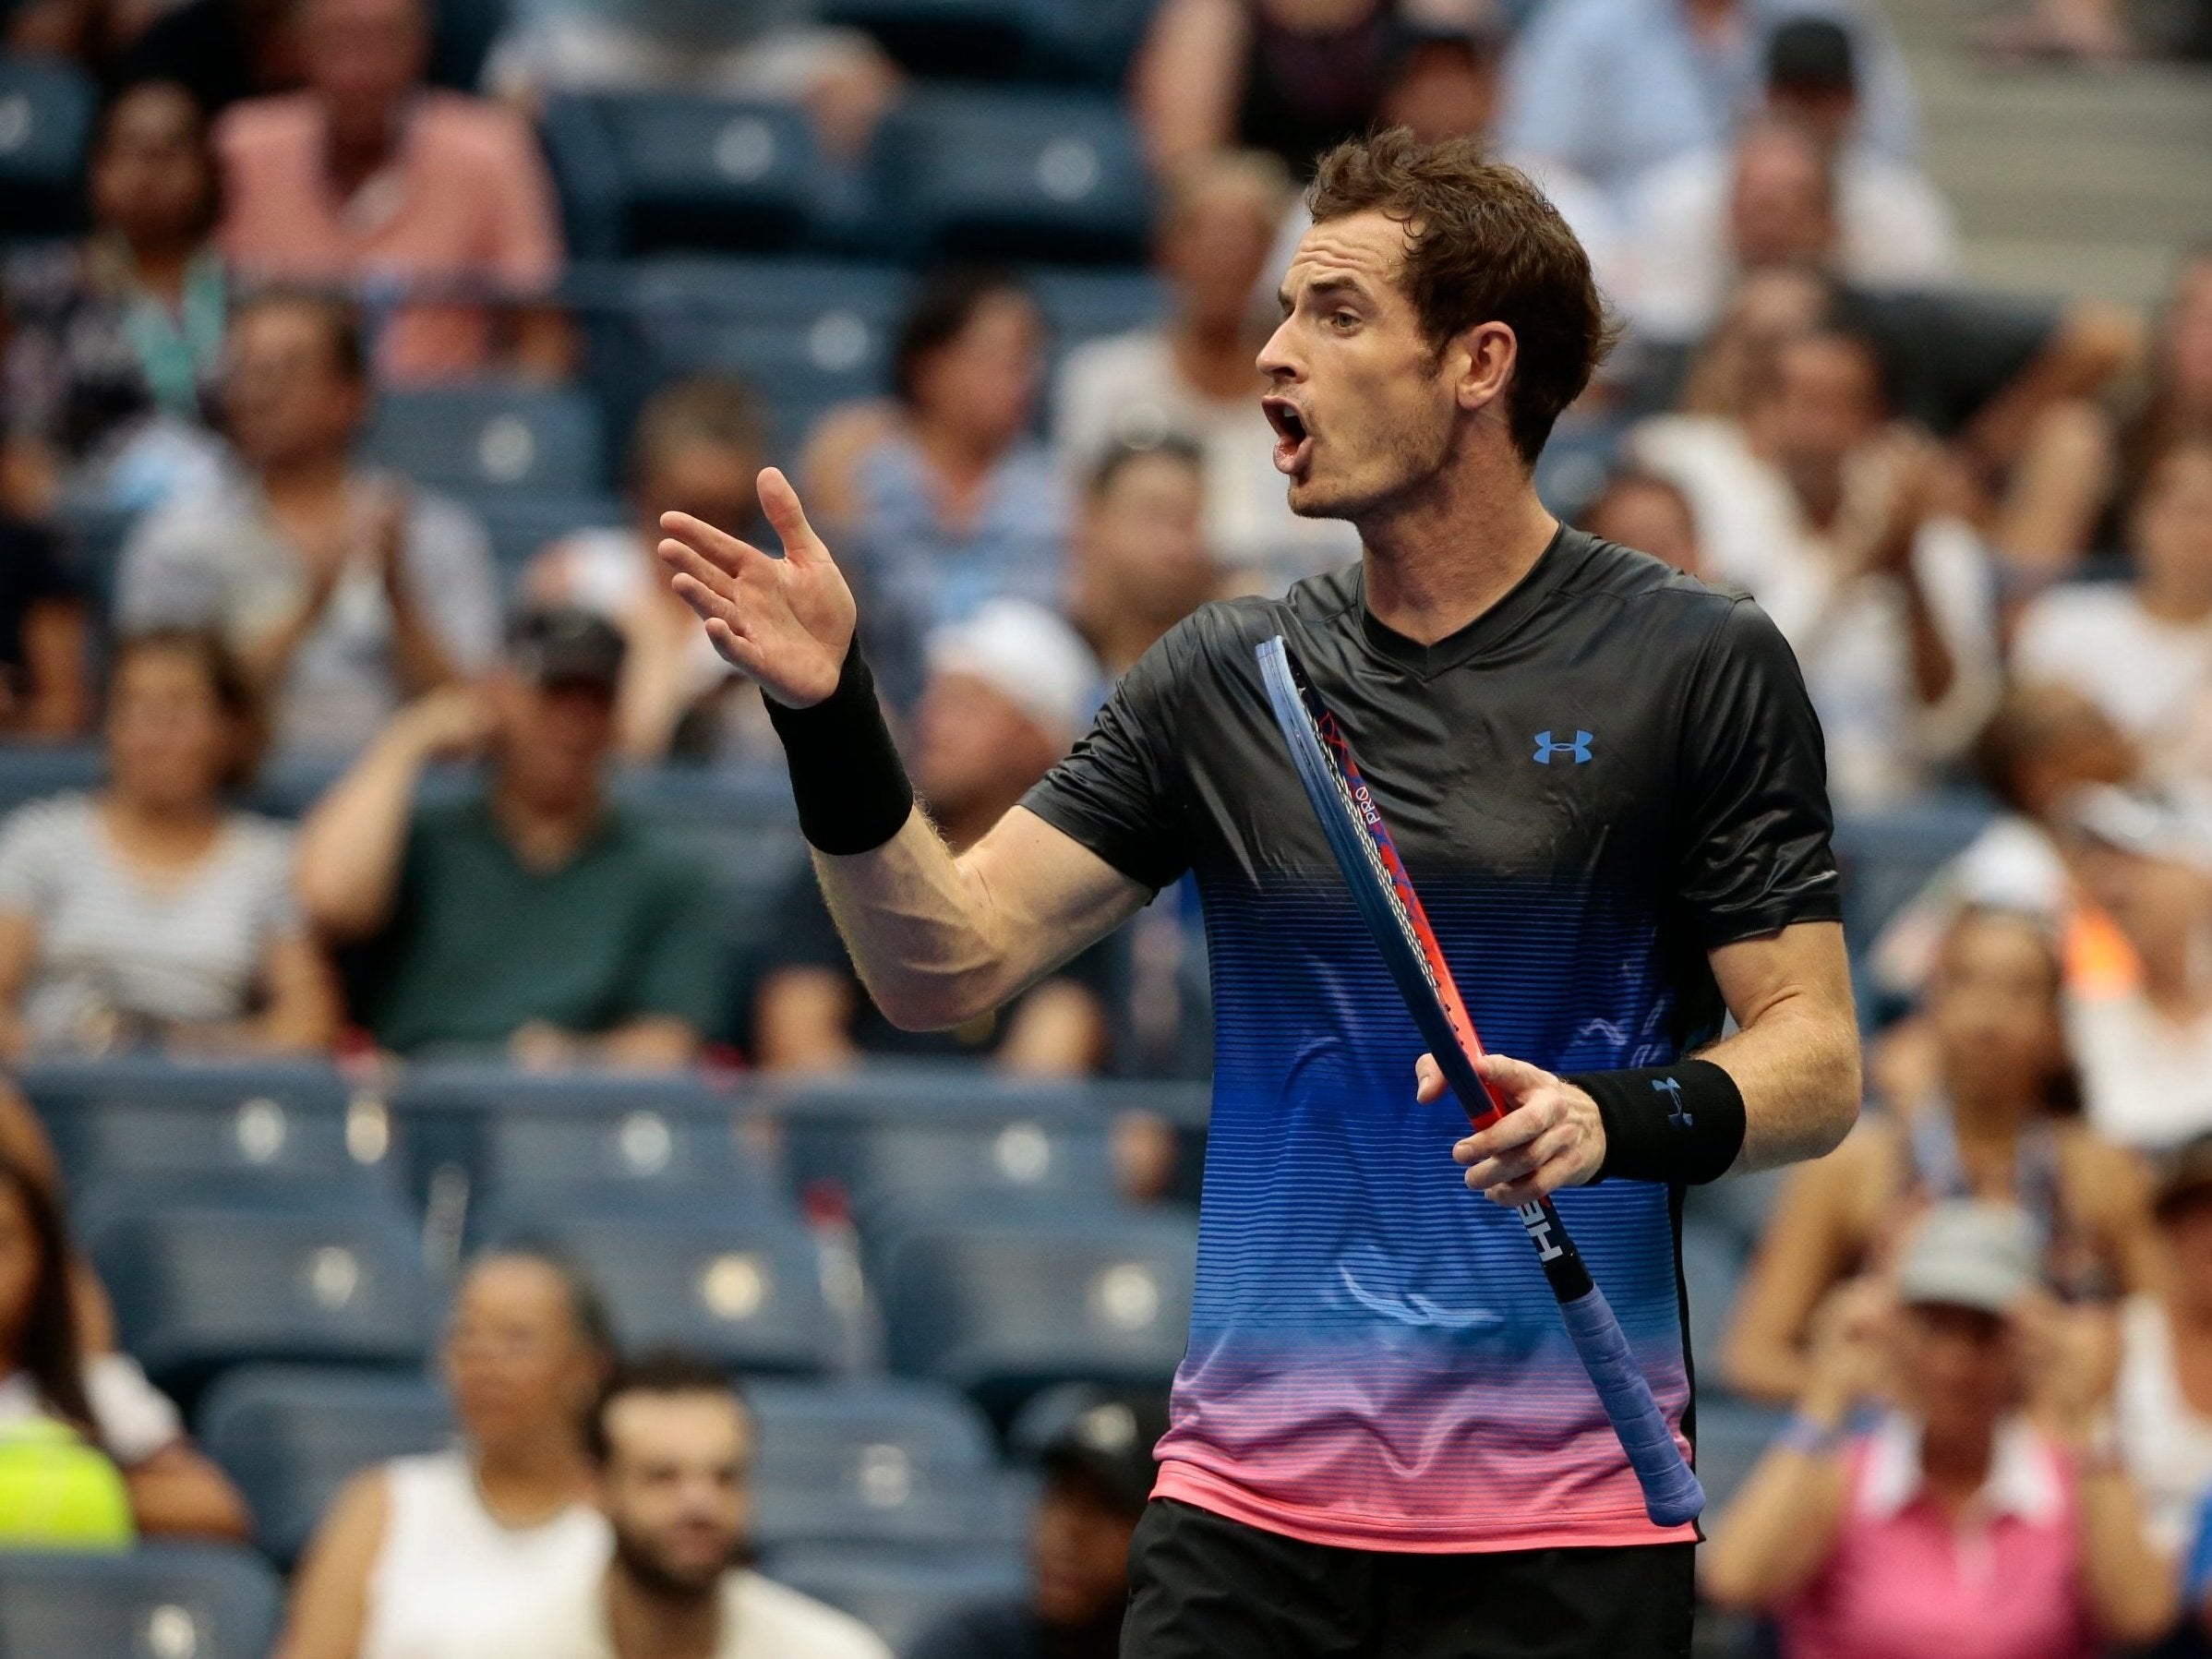 Andy Murray went out of the US Open in the second round but it was good to see the Briton back in action at a Grand Slam